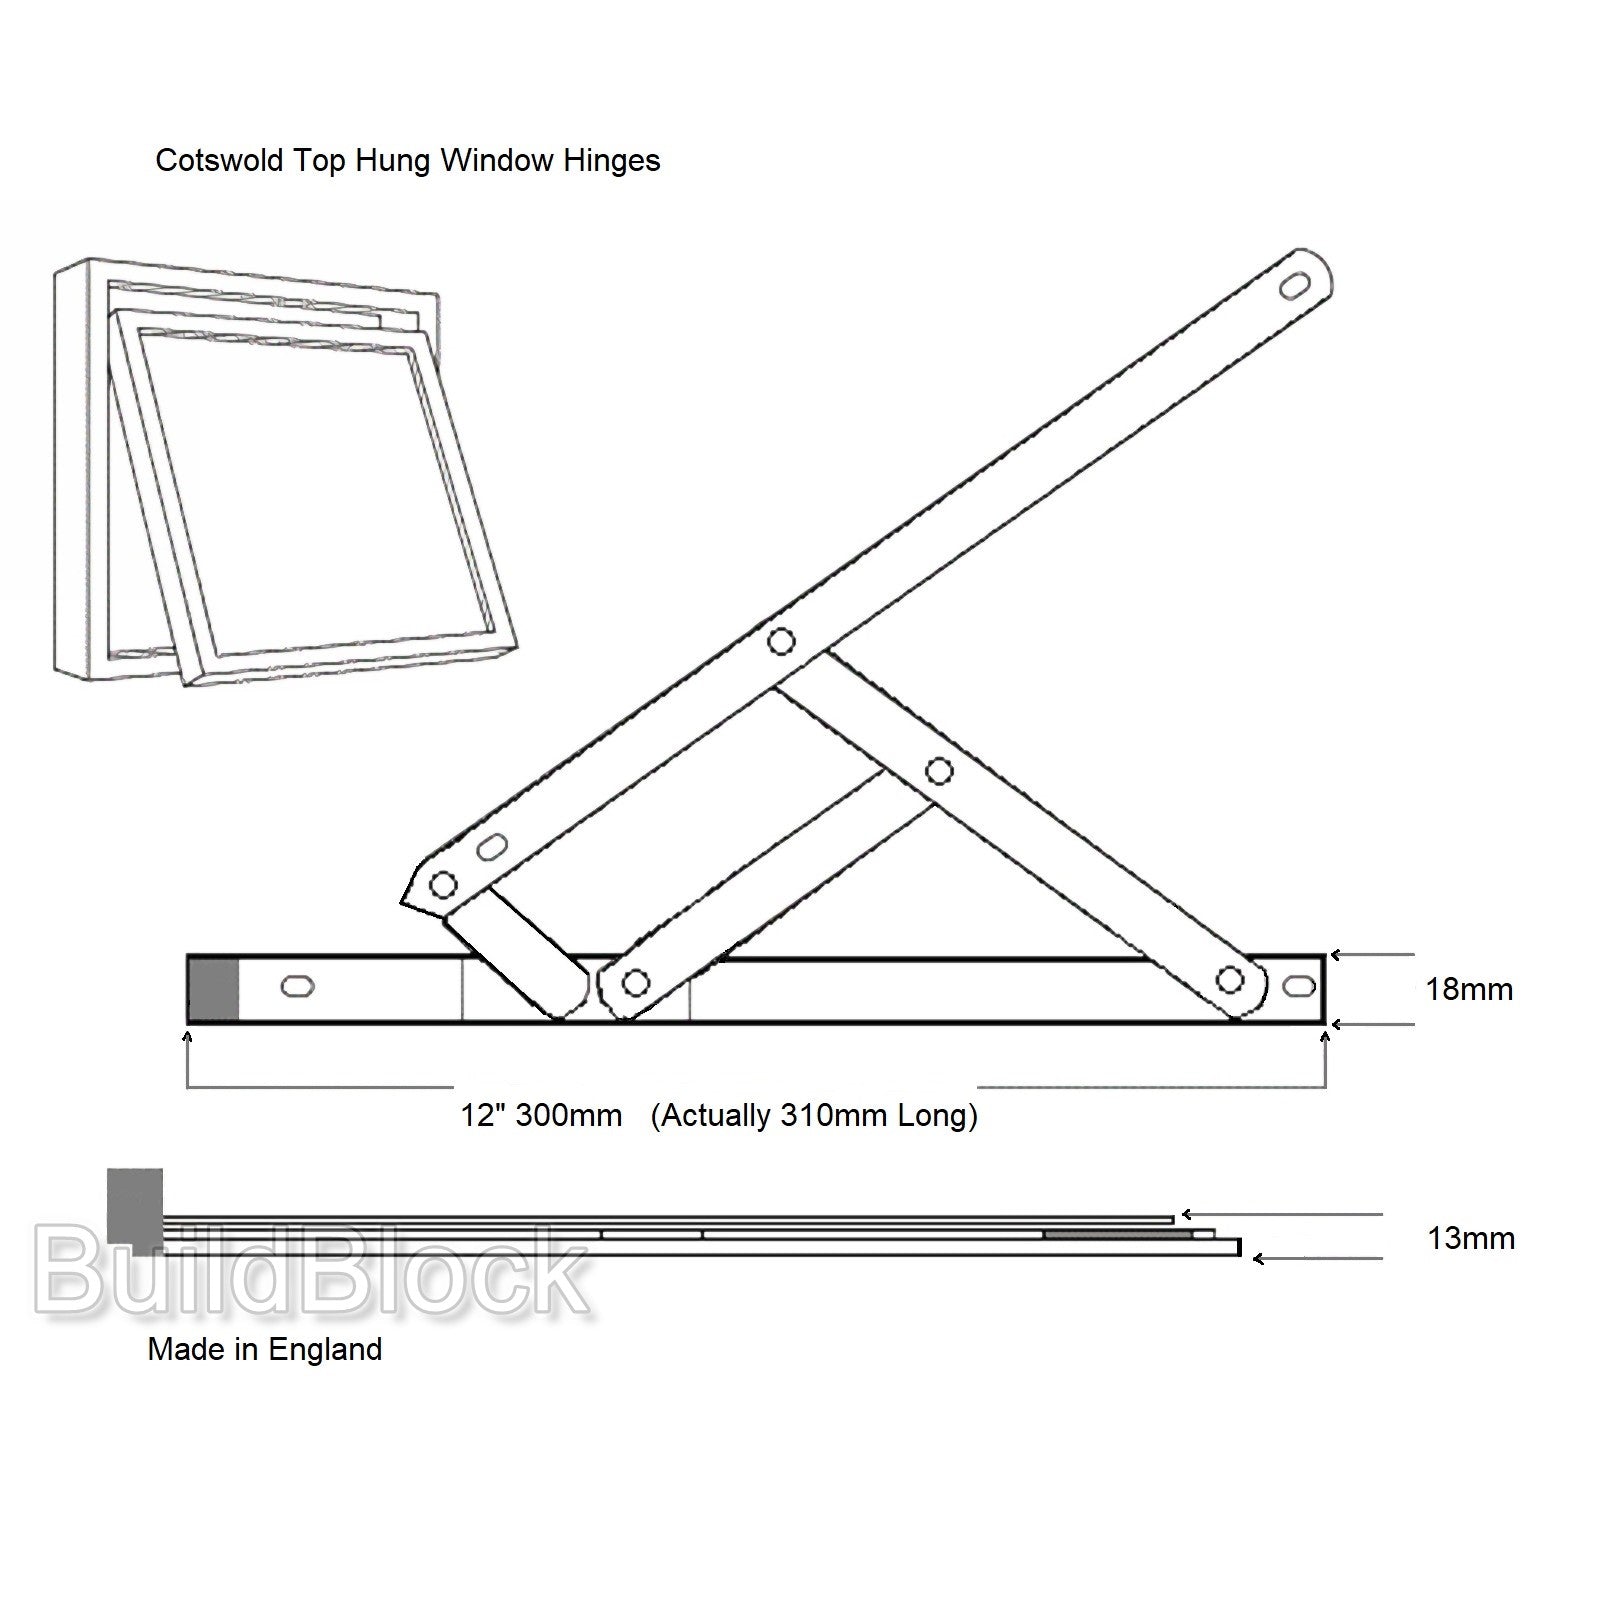 12" Top Hung Window Hinges Drawing